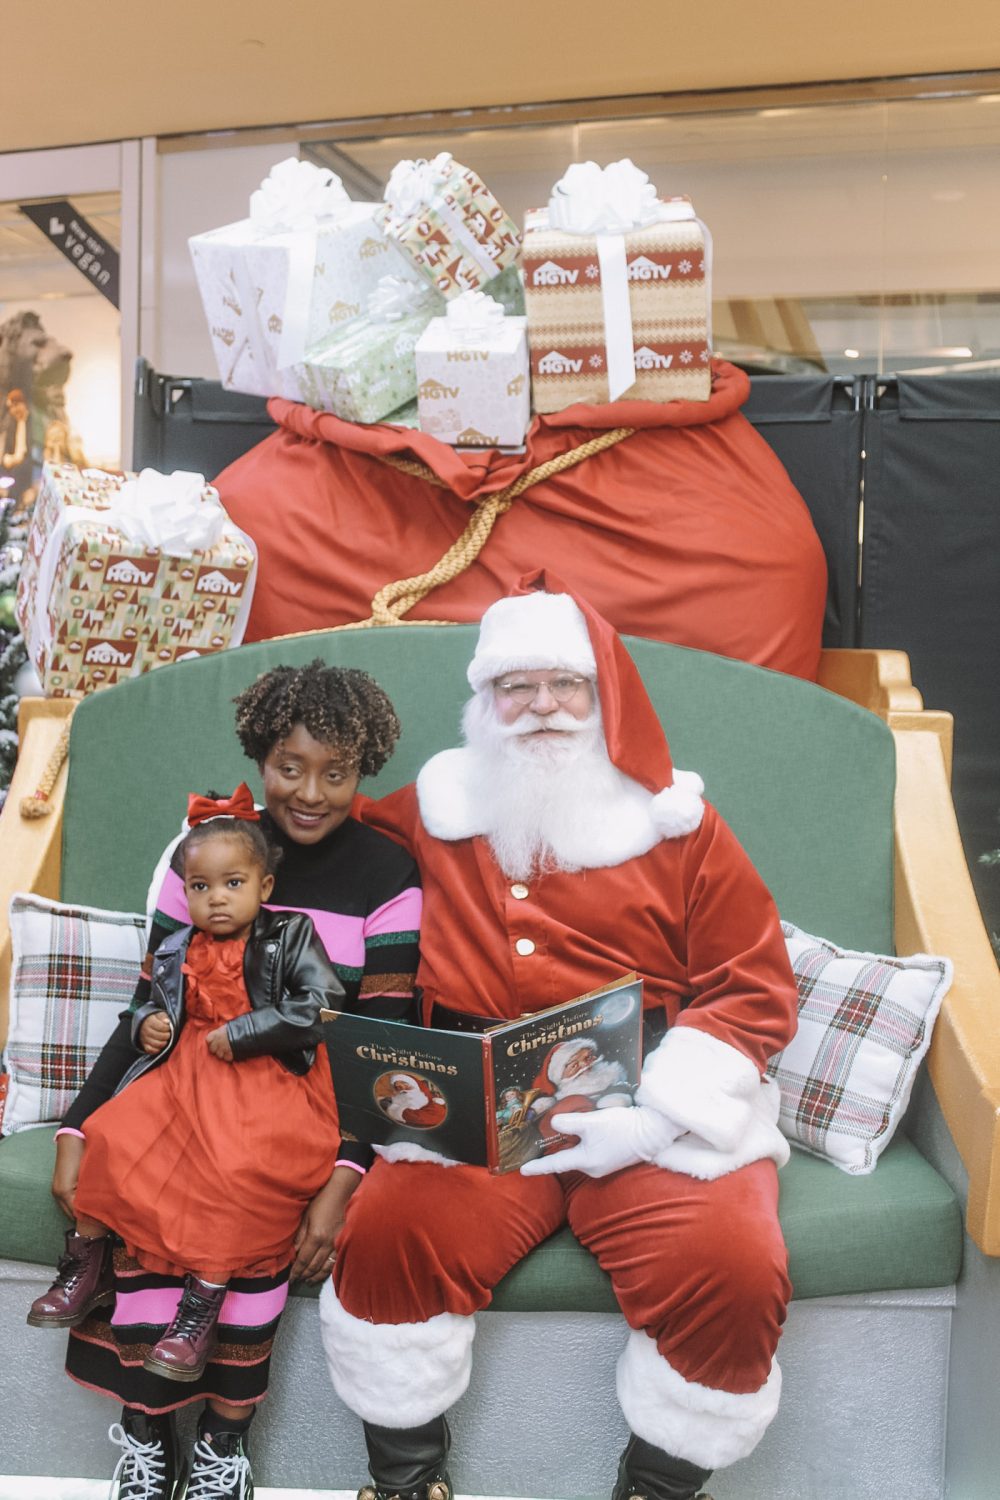 Our experience at HGTV Santa HQ at Queens Center Mall